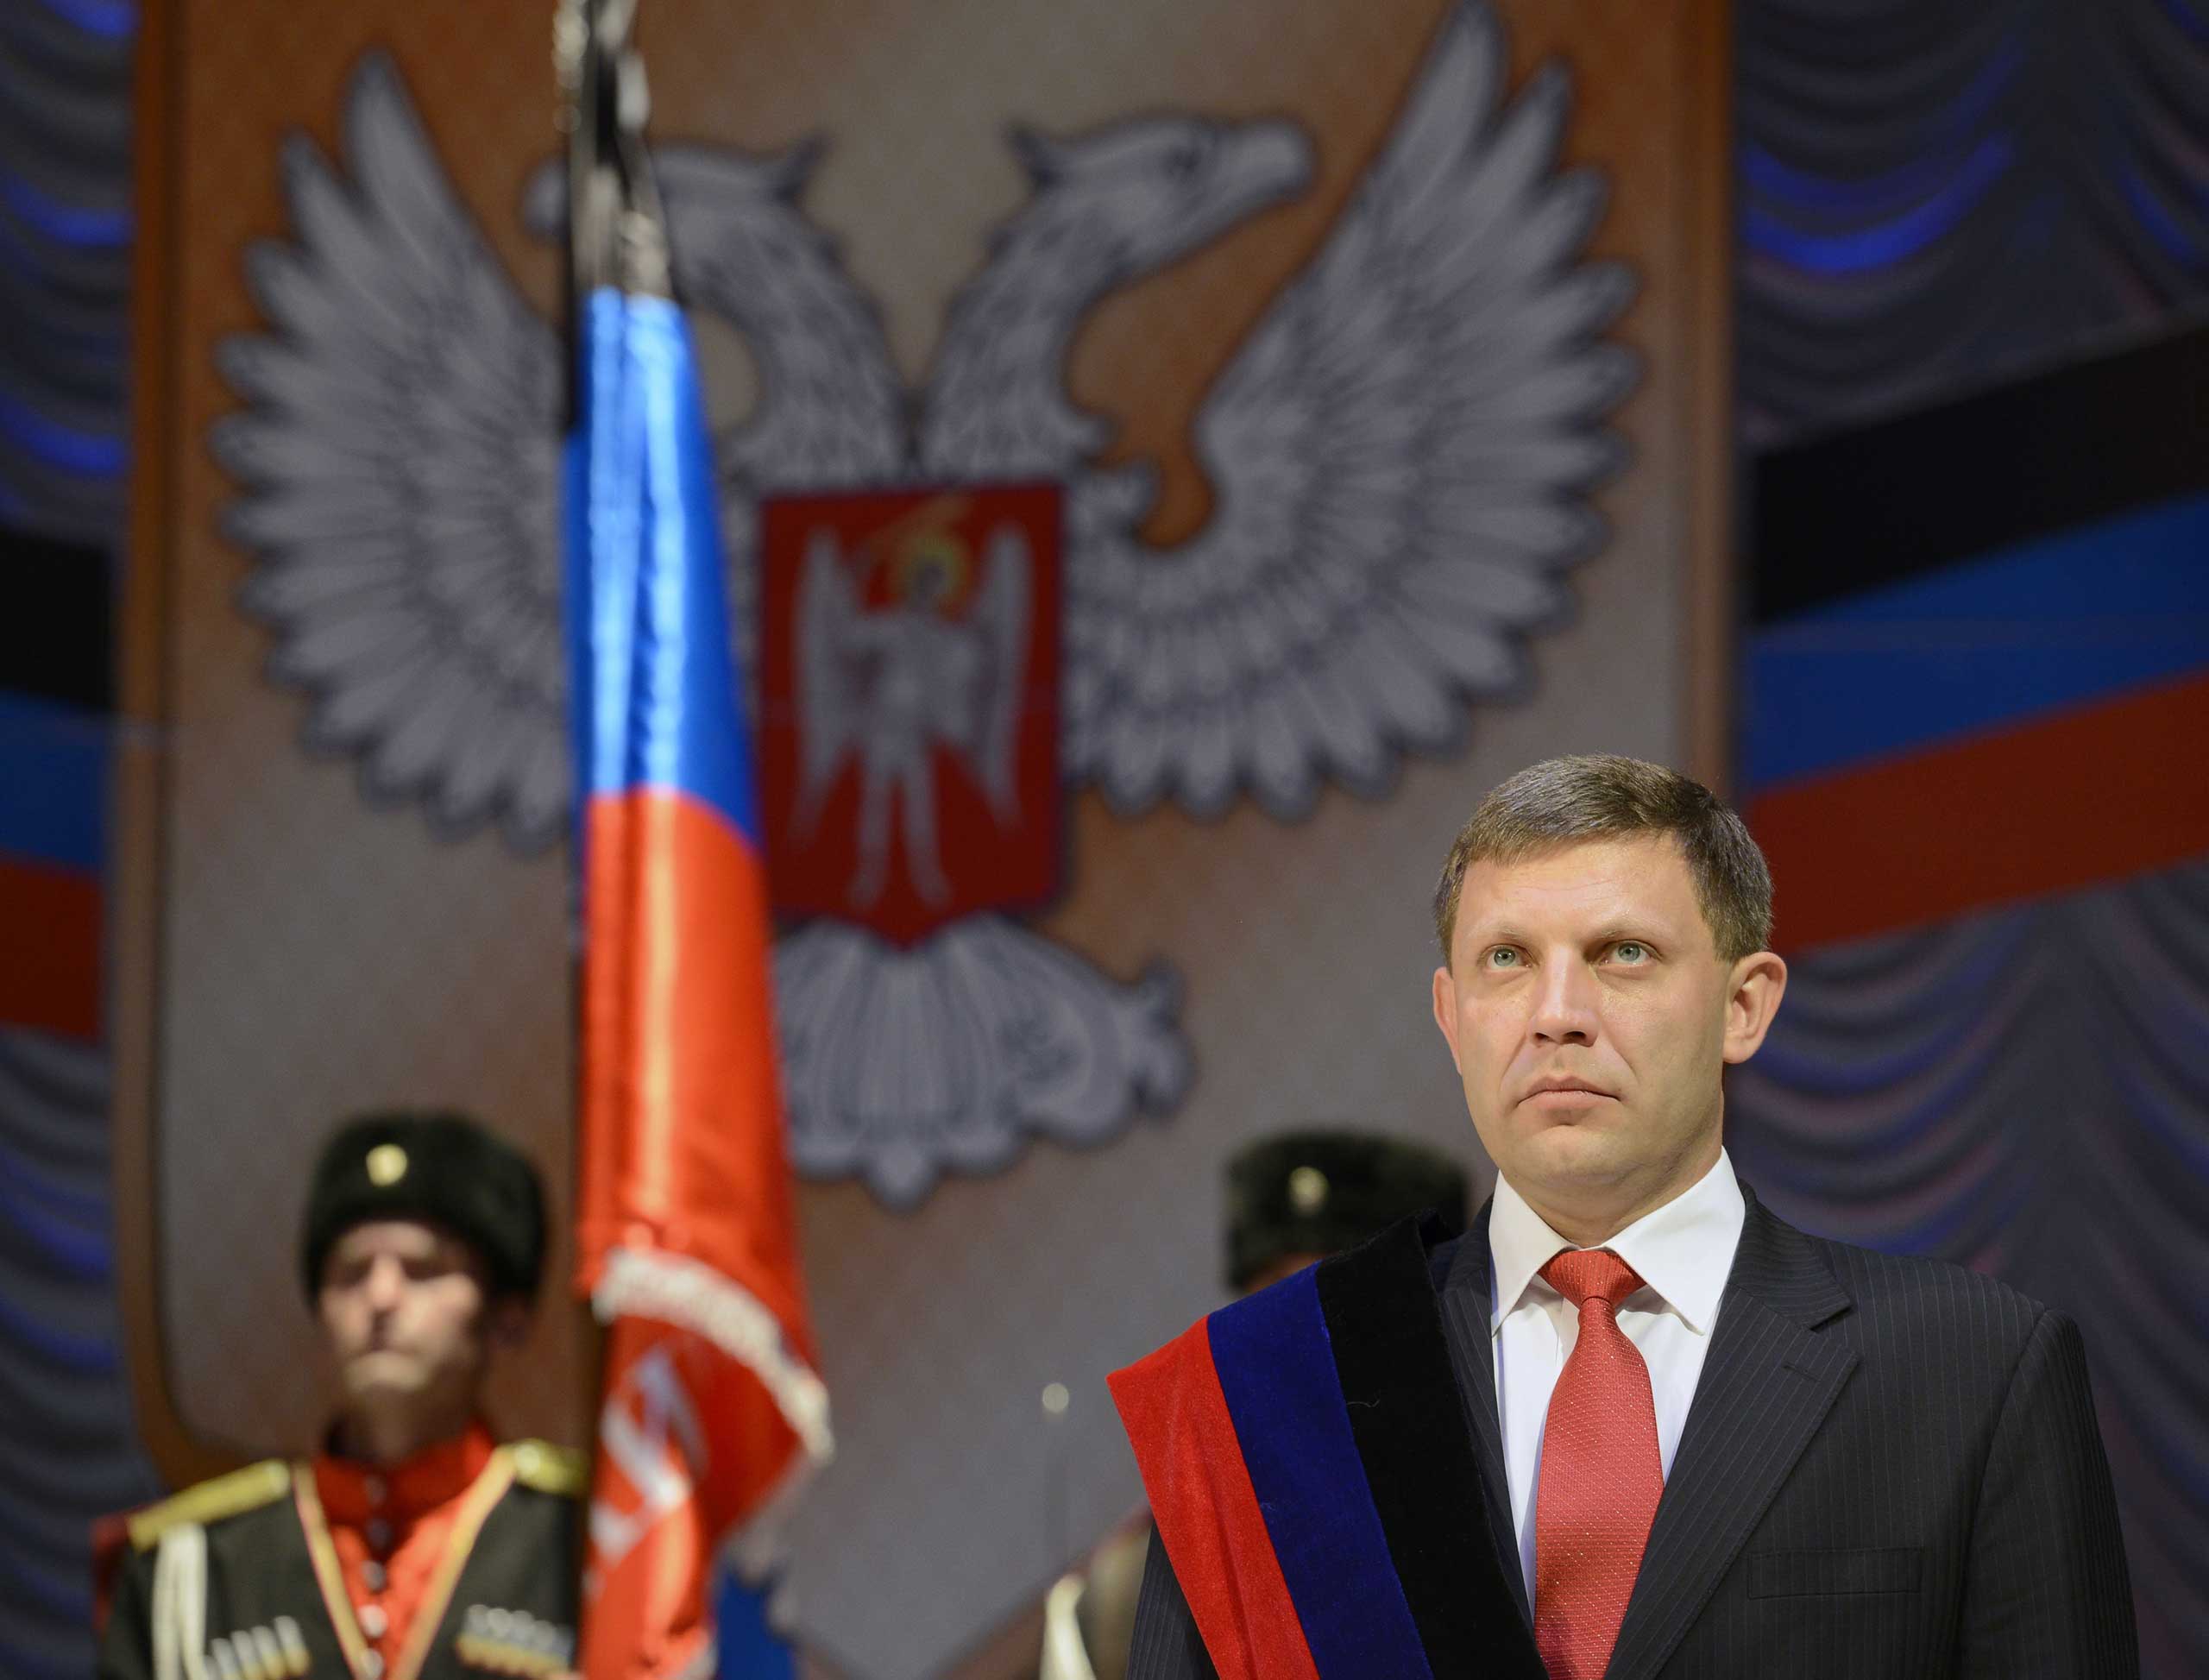 The newly elected leader of the self-proclaimed Donetsk People's Republic, Alexander Zakharchenko,  takes the oath on Nov. 4, 2014, during an inauguration ceremony in the eastern Ukrainian city of Donetsk (Alexander Khudoteply—AFP/Getty Images)